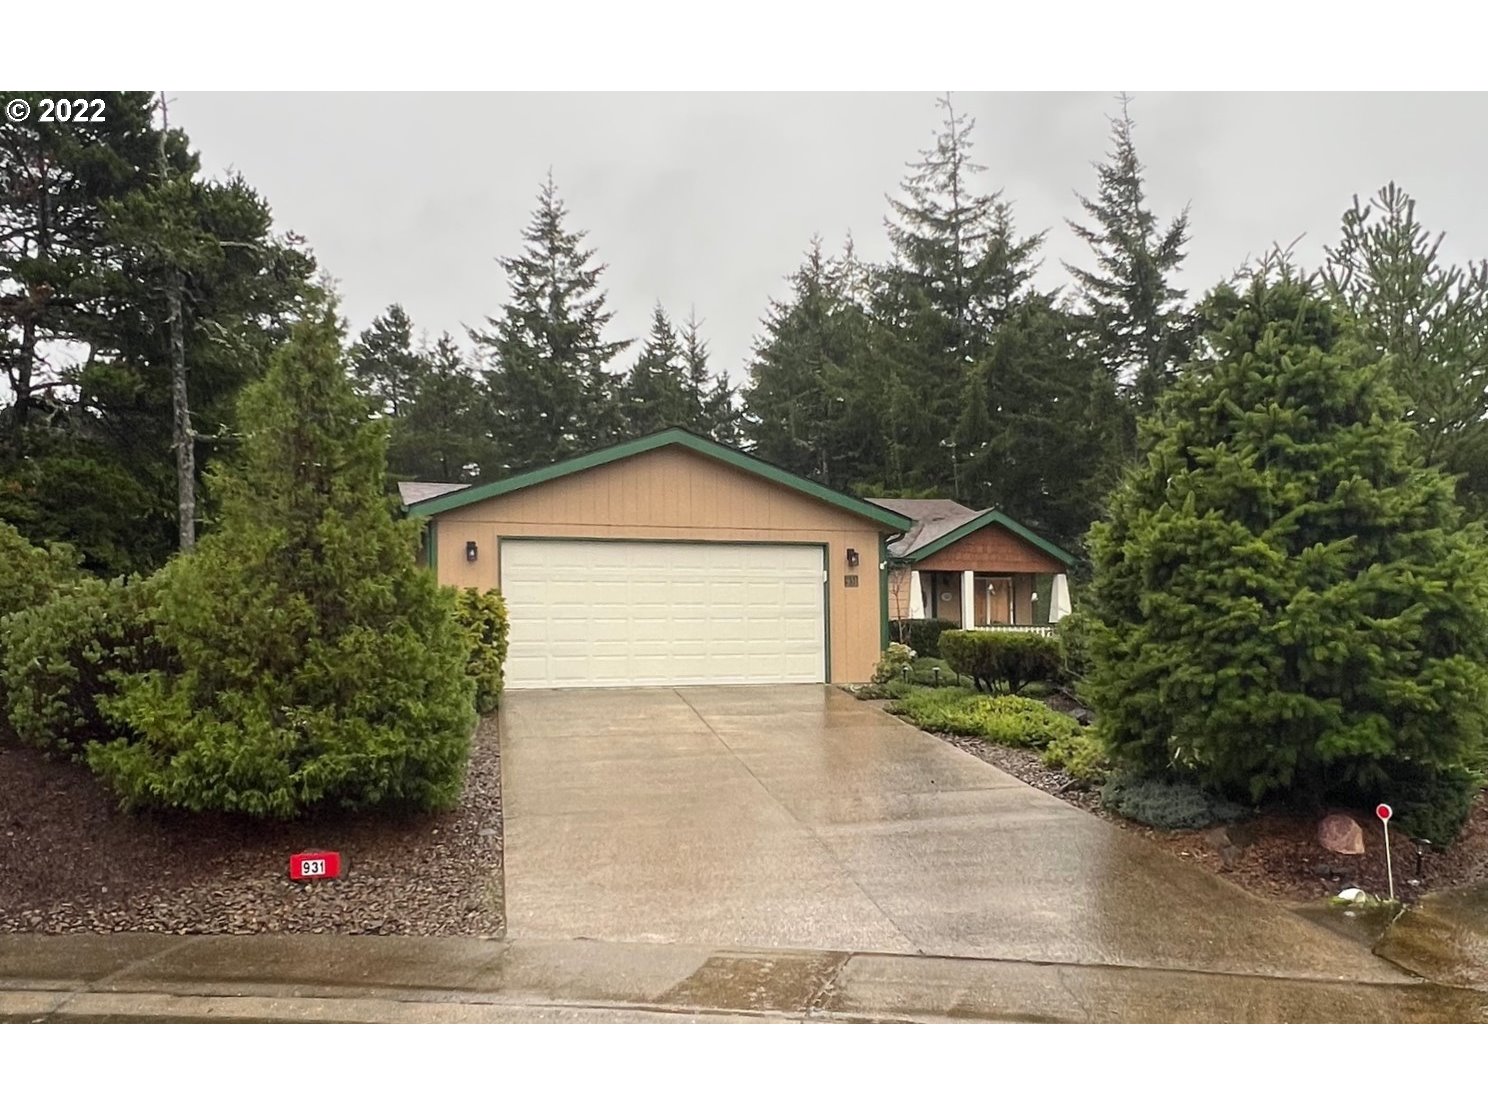 931 30TH WAY, Florence, OR 97439